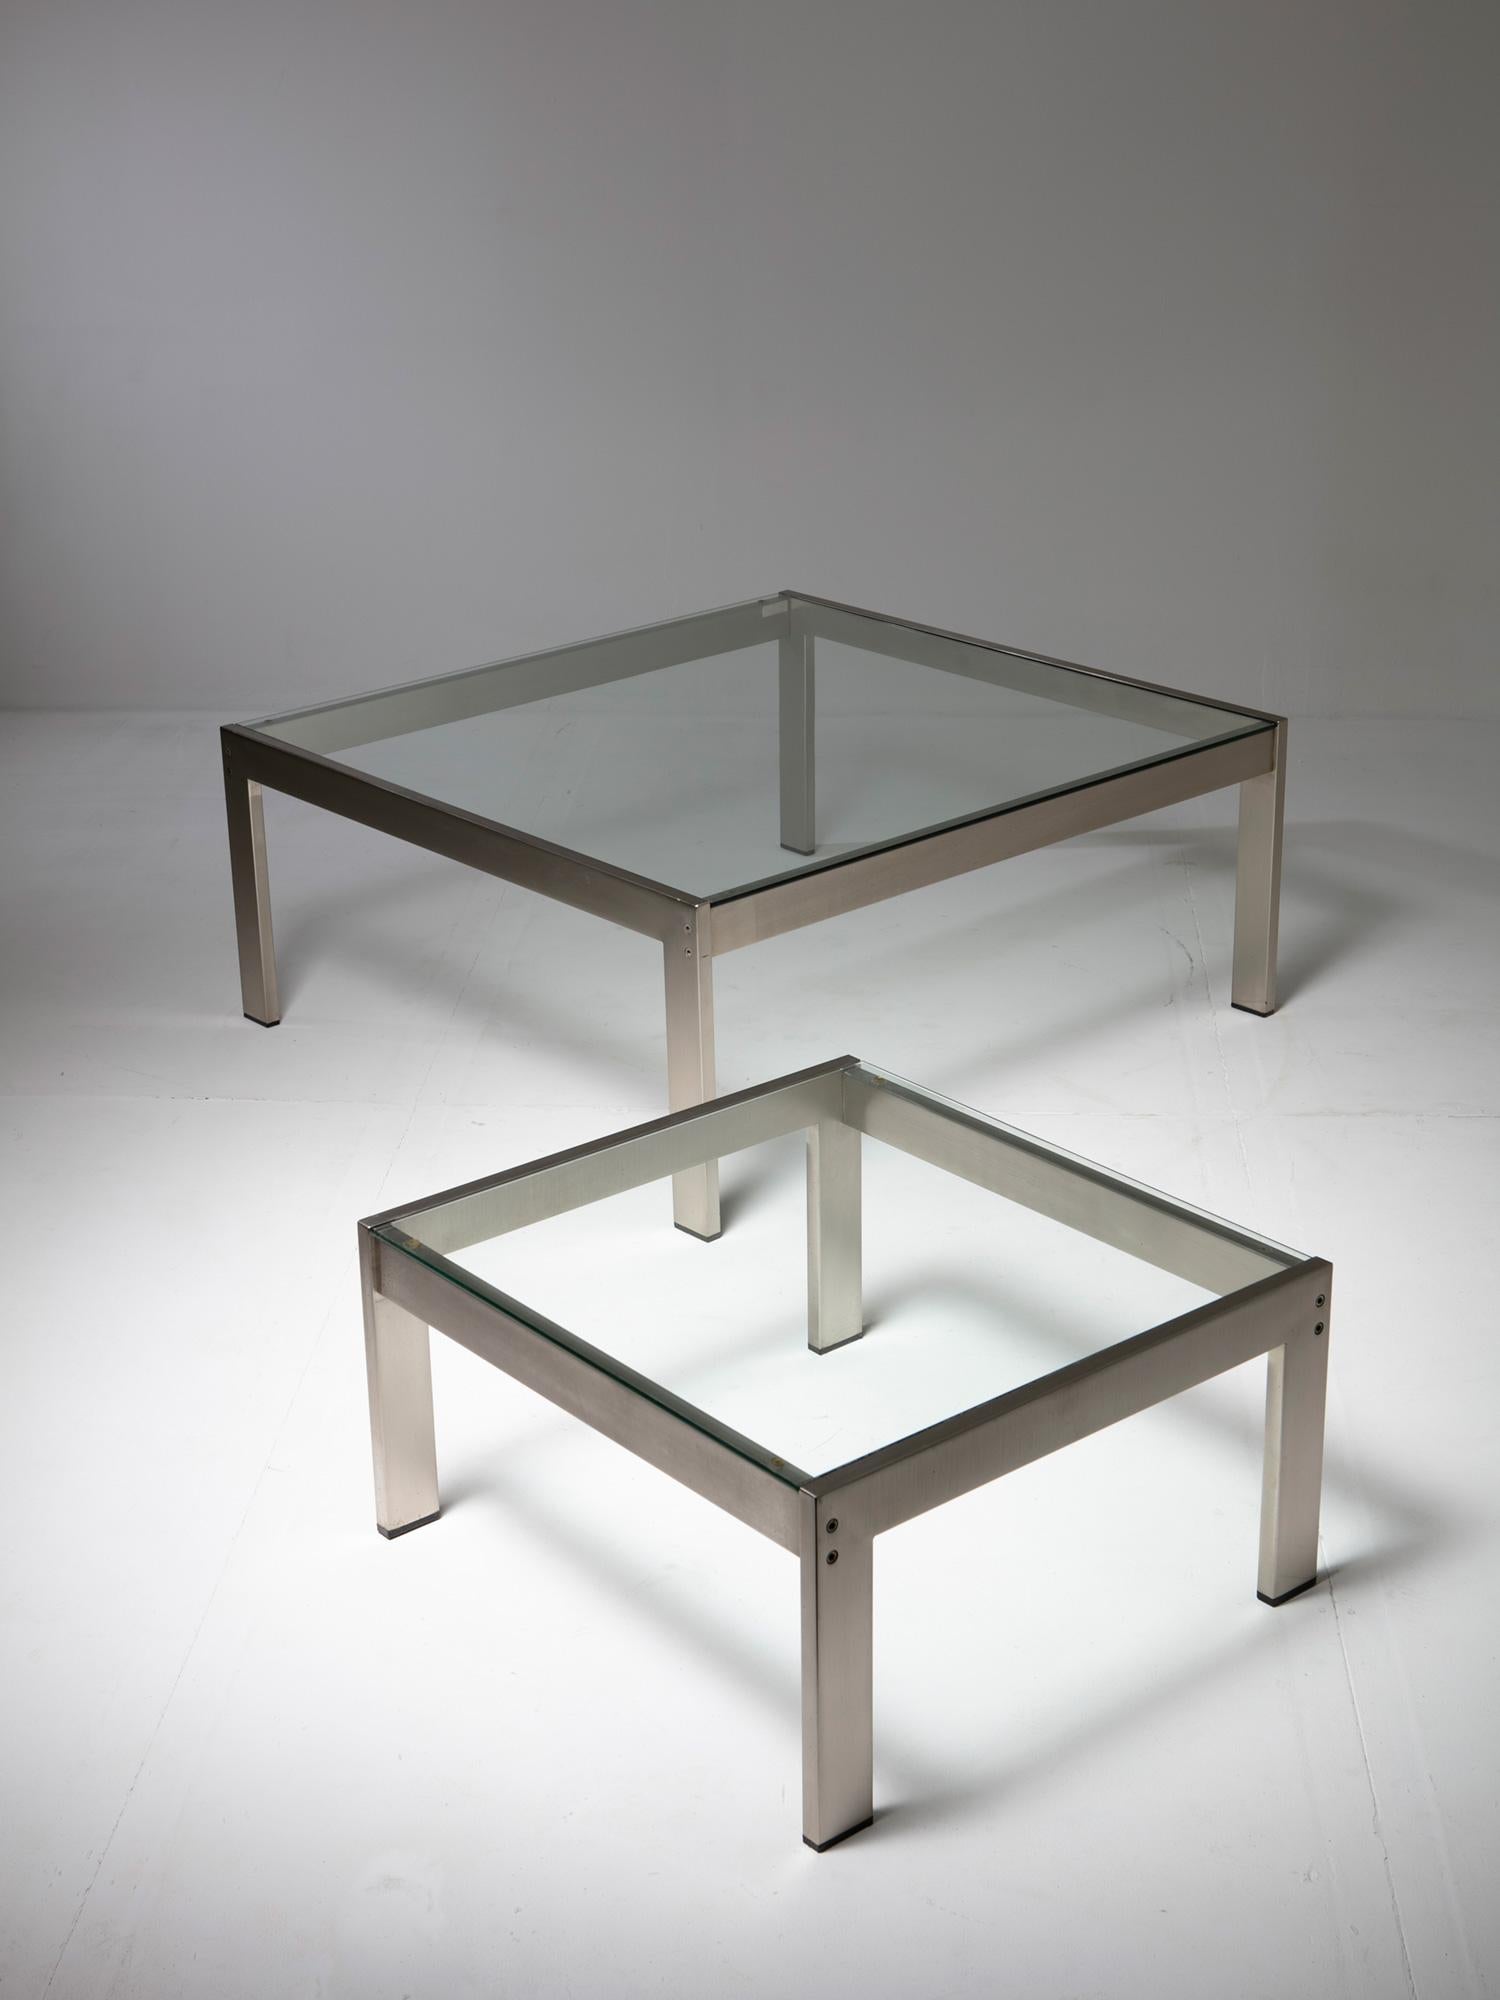 Remarkable pair of Tau tables by Gae Aulenti for La Rinascente.
Thick glass top on a sturdy brushed steel frame with underlined construction details.